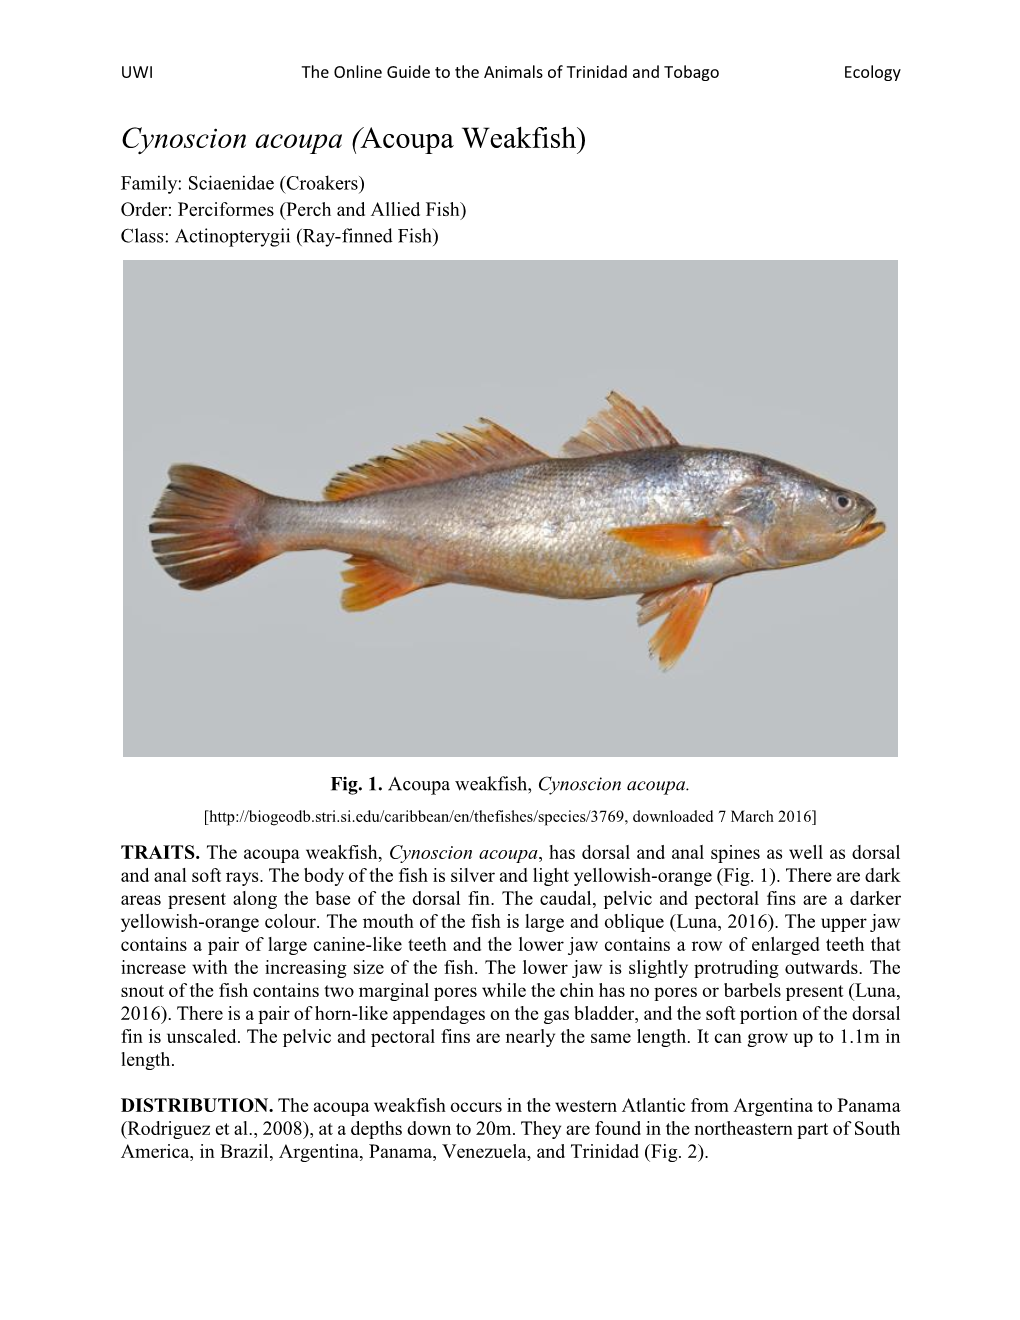 Cynoscion Acoupa (Acoupa Weakfish) Family: Sciaenidae (Croakers) Order: Perciformes (Perch and Allied Fish) Class: Actinopterygii (Ray-Finned Fish)